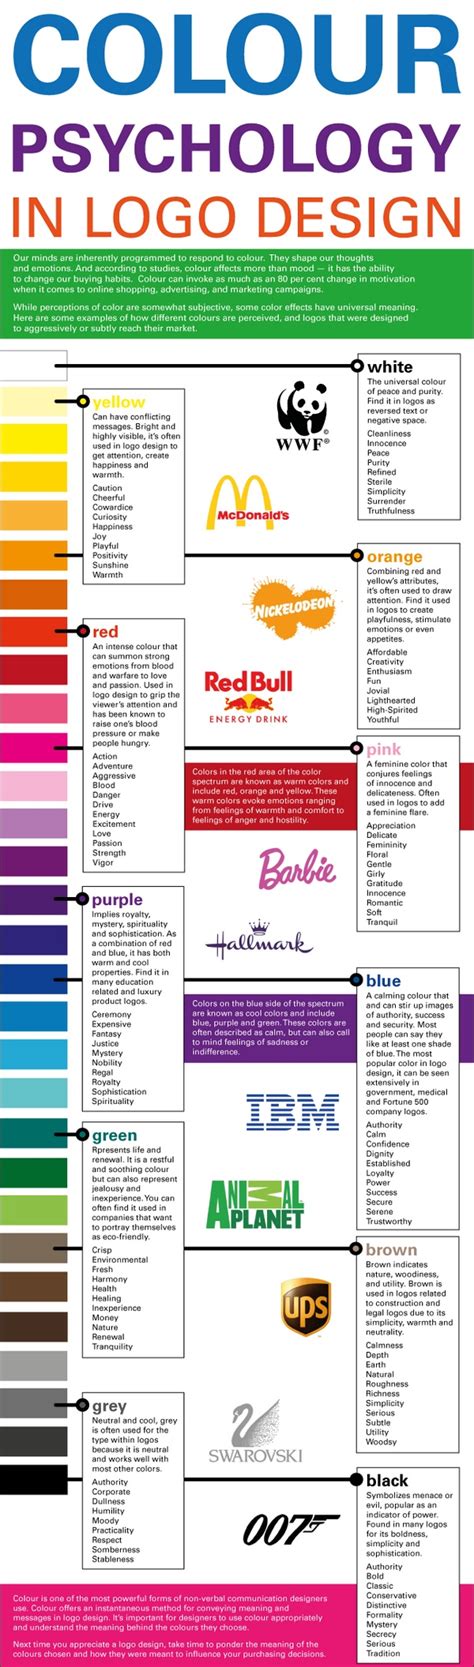 Colour Psychology in Logo Design | Infographic | Logo design infographic, Color psychology ...